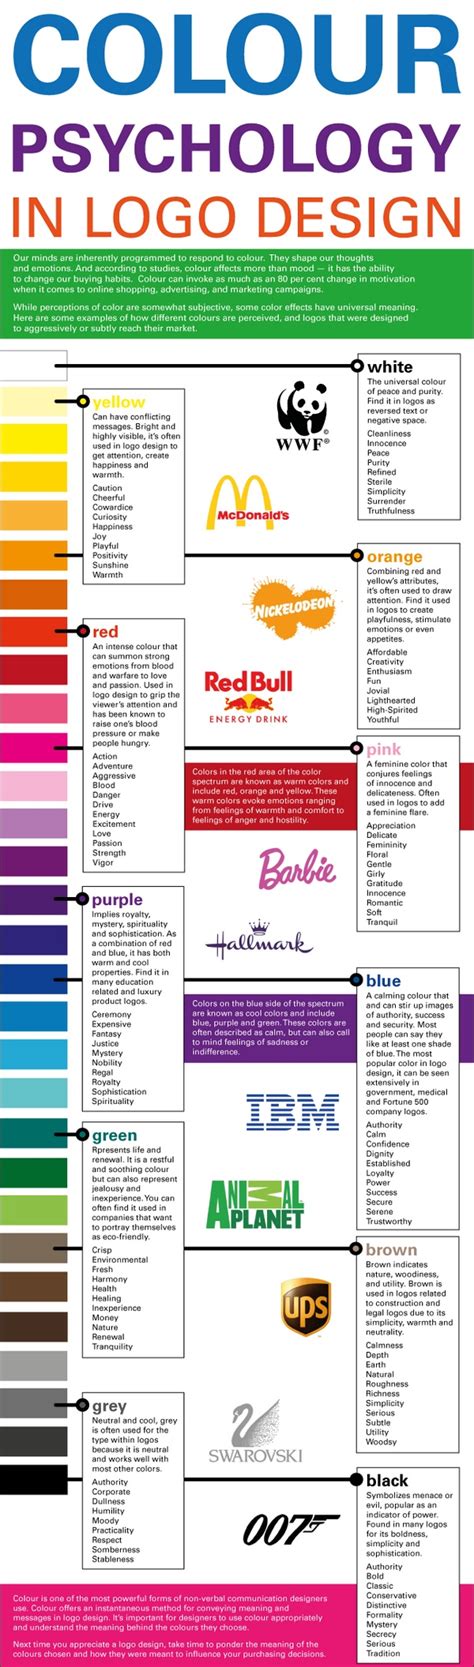 Colour Psychology in Logo Design | Infographic | Logo design infographic, Color psychology ...